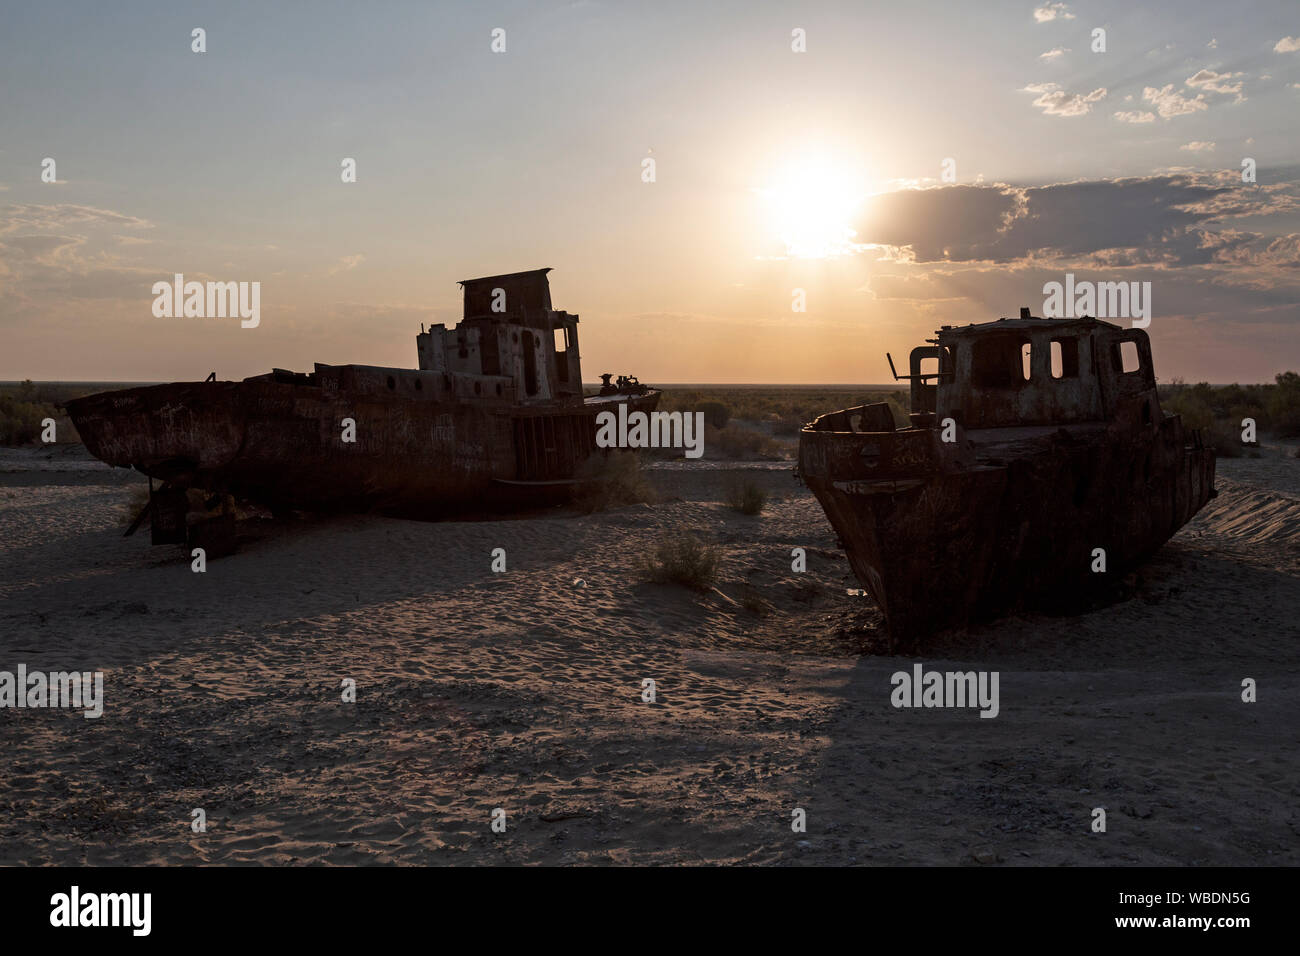 Moynaq, or Muynak, in Uzbekistan. Rusting boats in the desert that used to be part of the Aral Sea, which was almost completely emptied by the Soviets. Stock Photo